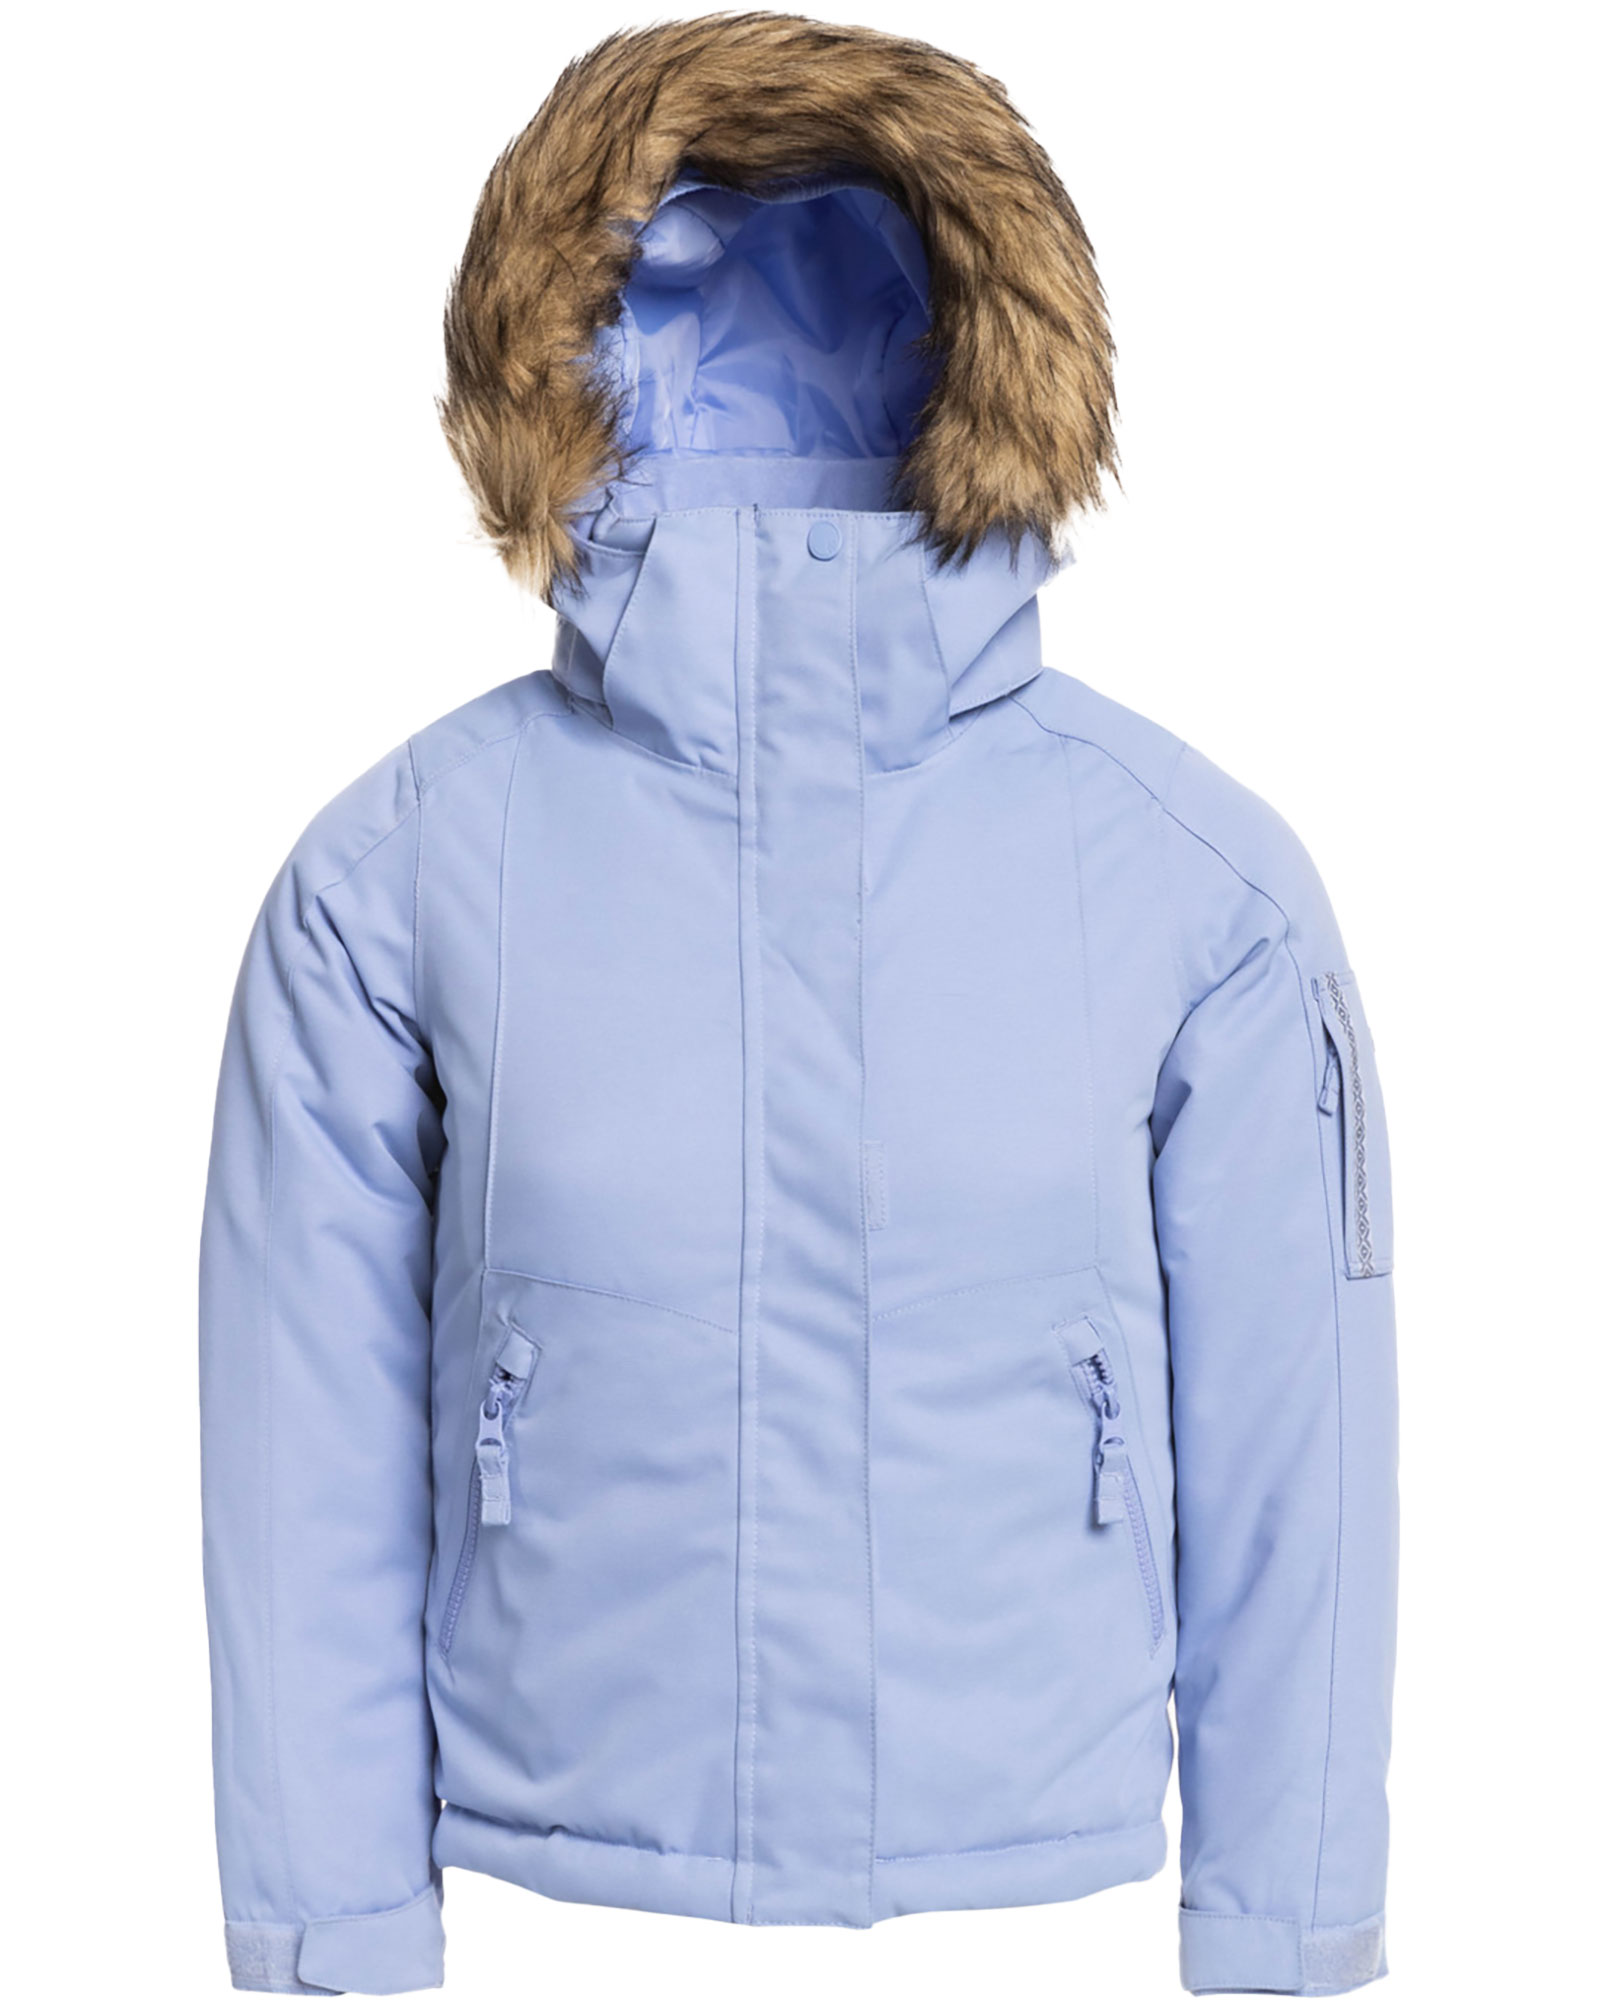 Product image of Roxy Mead Kids' Jacket 14+